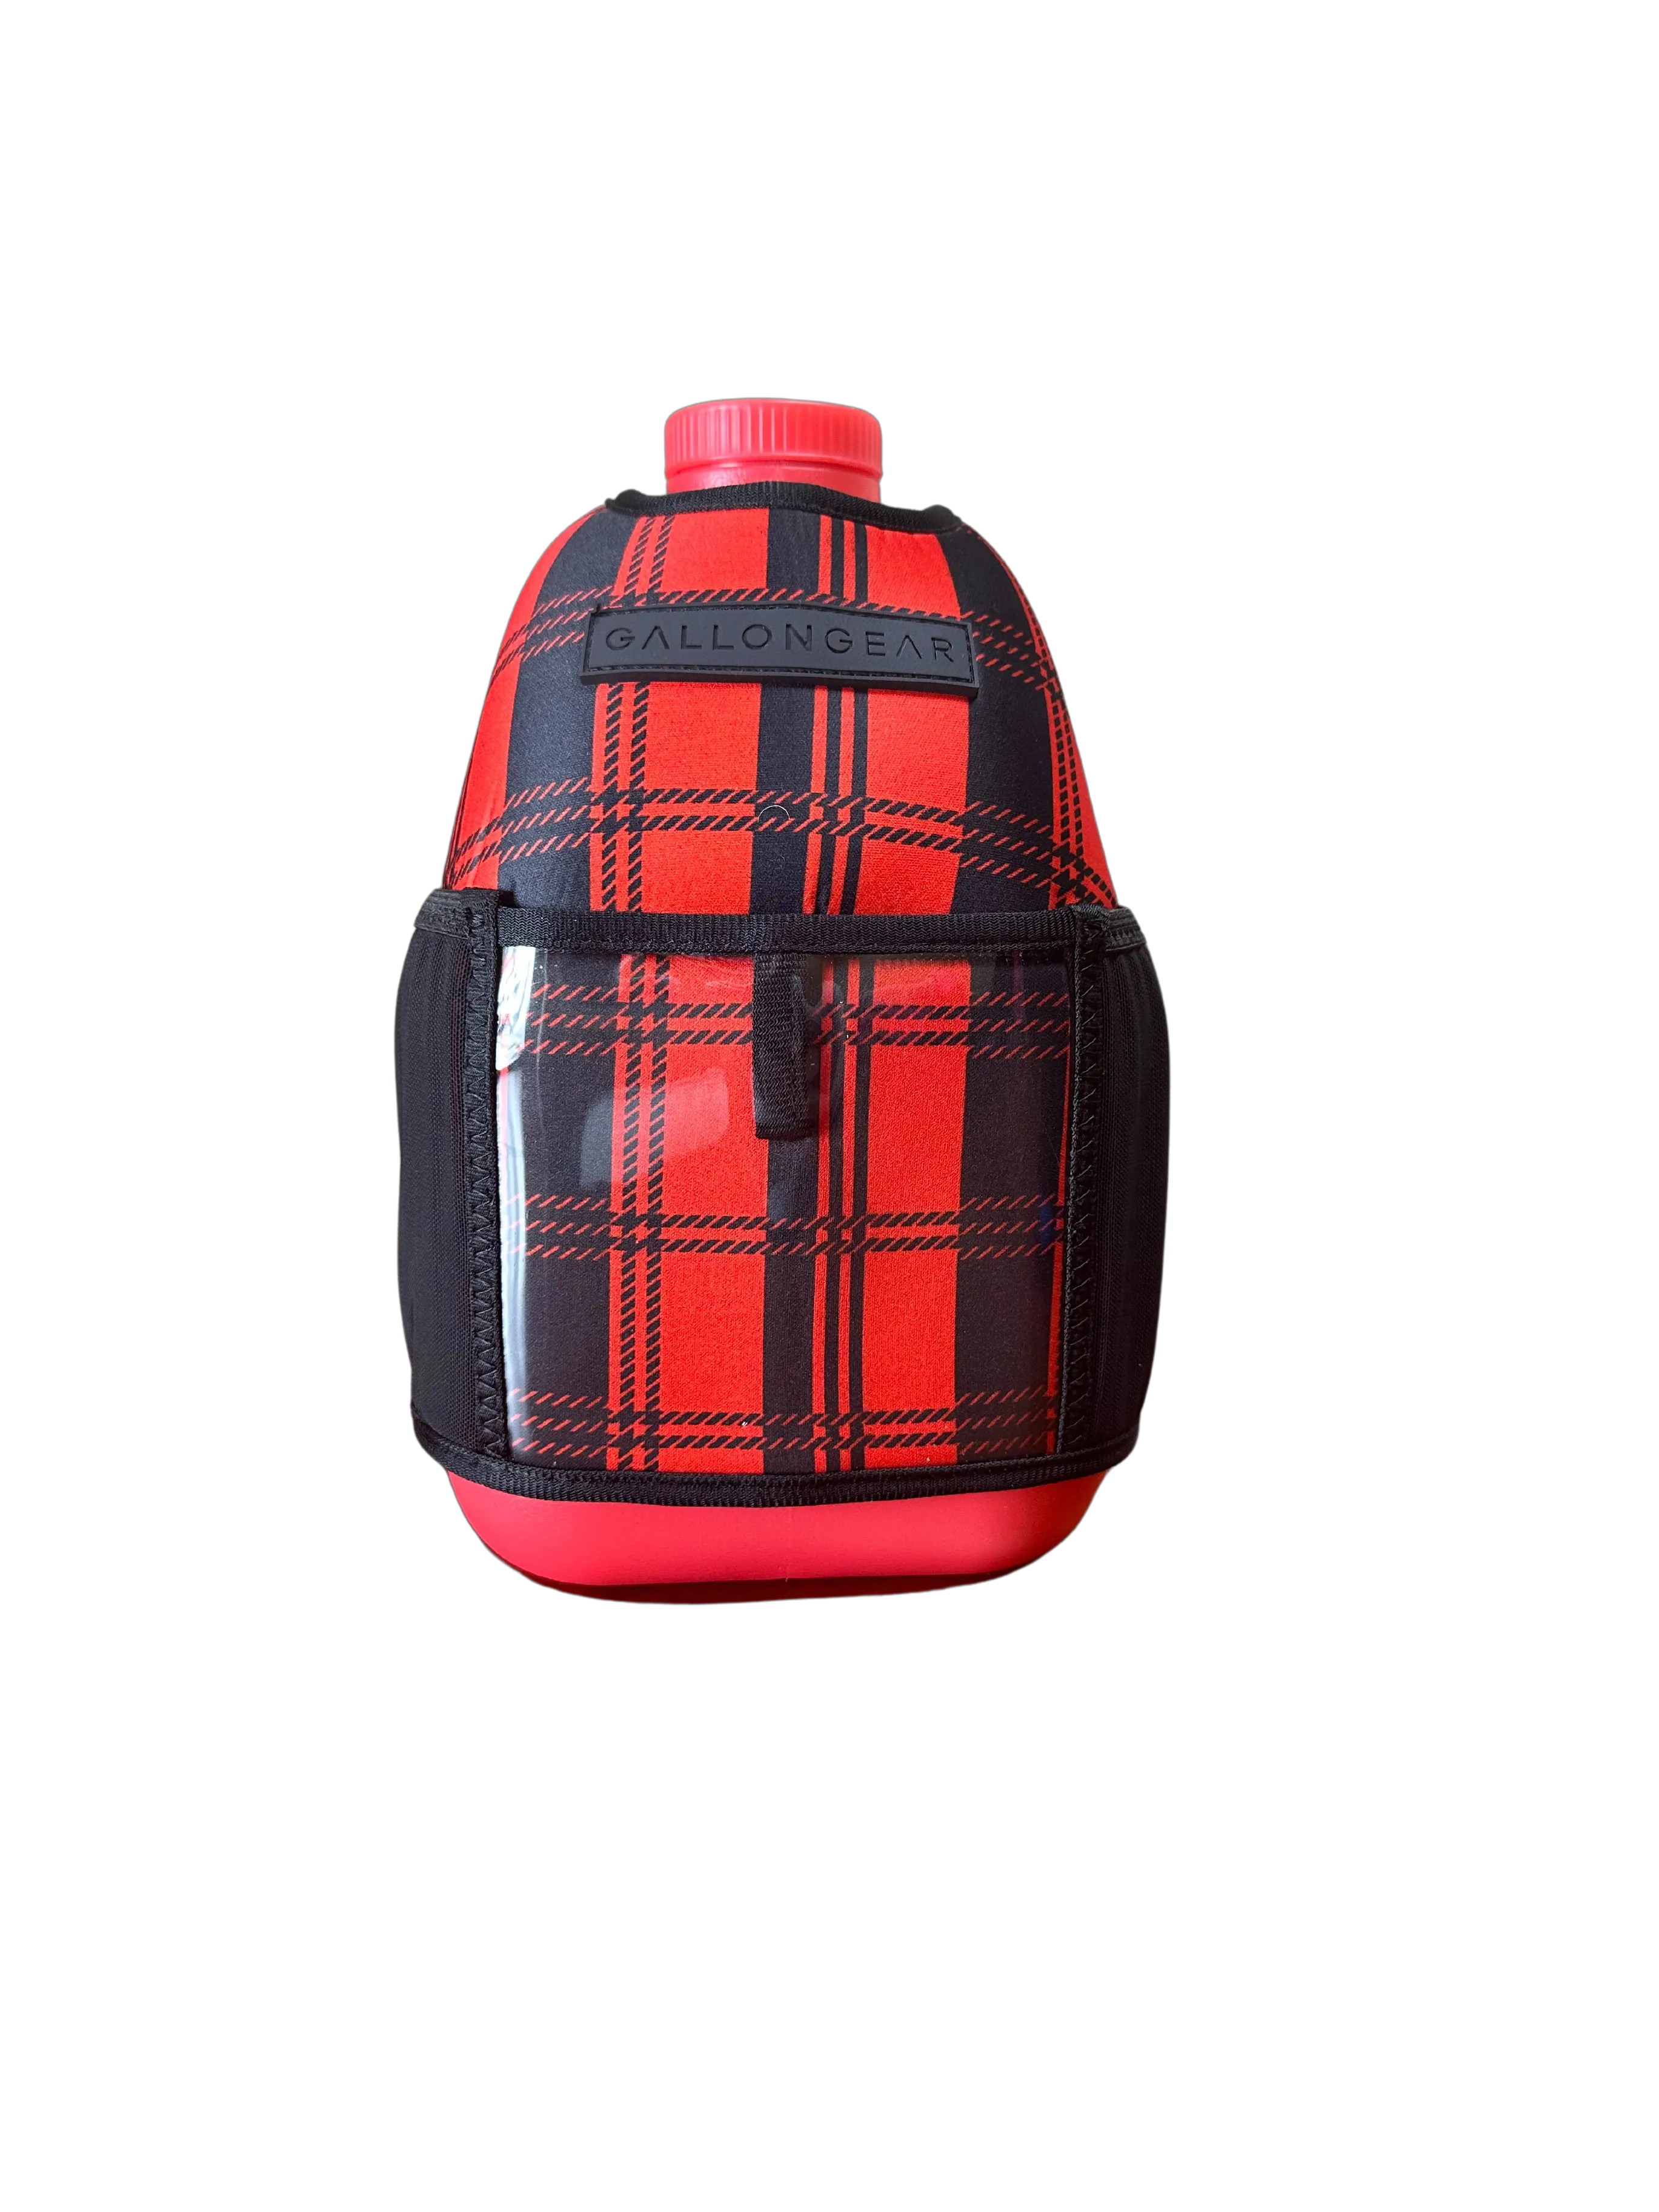 (1 GALLON COMBO) Red Jug / Red Plaid Booty